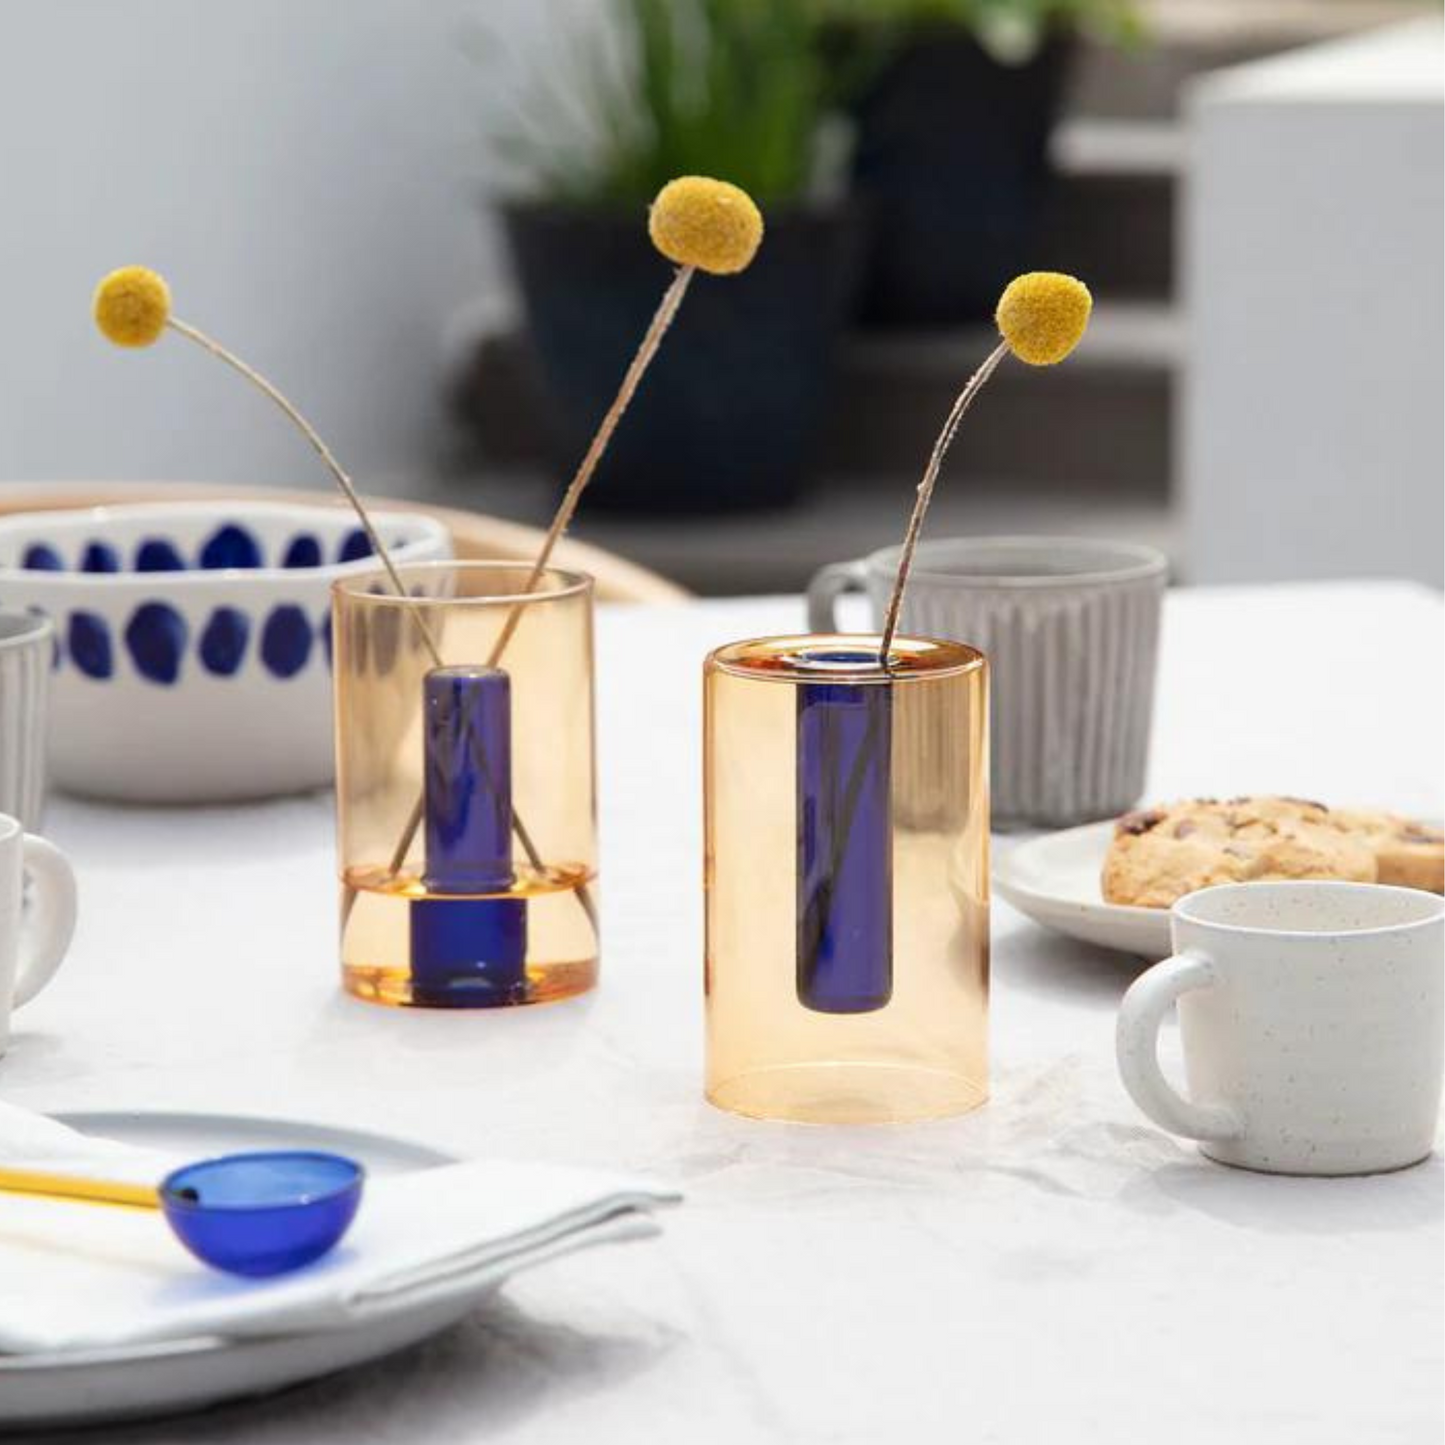 Load image into Gallery viewer, reversible glass vase in cobalt and peach on a table setting with mugs, bowls and spoons.
